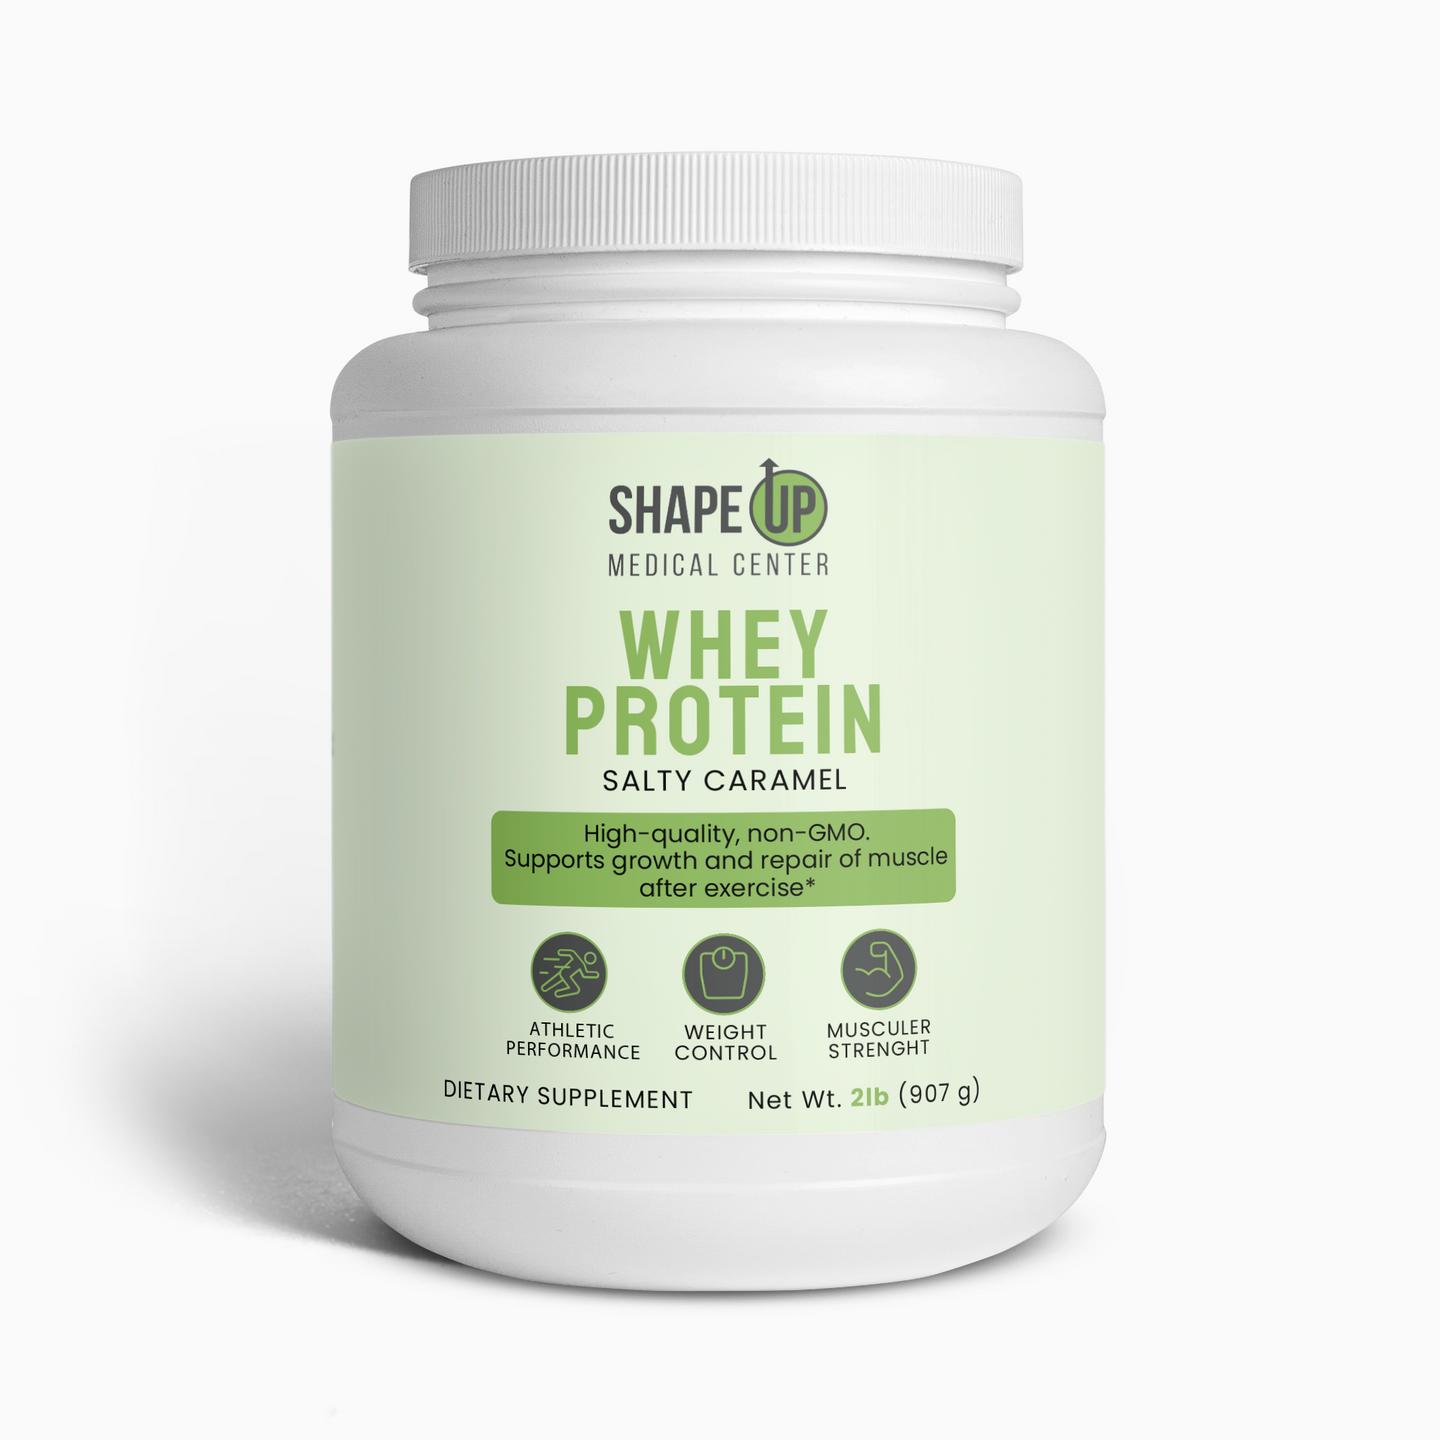 WHEY PROTEIN (SALTY CARAMEL FLAVOUR)